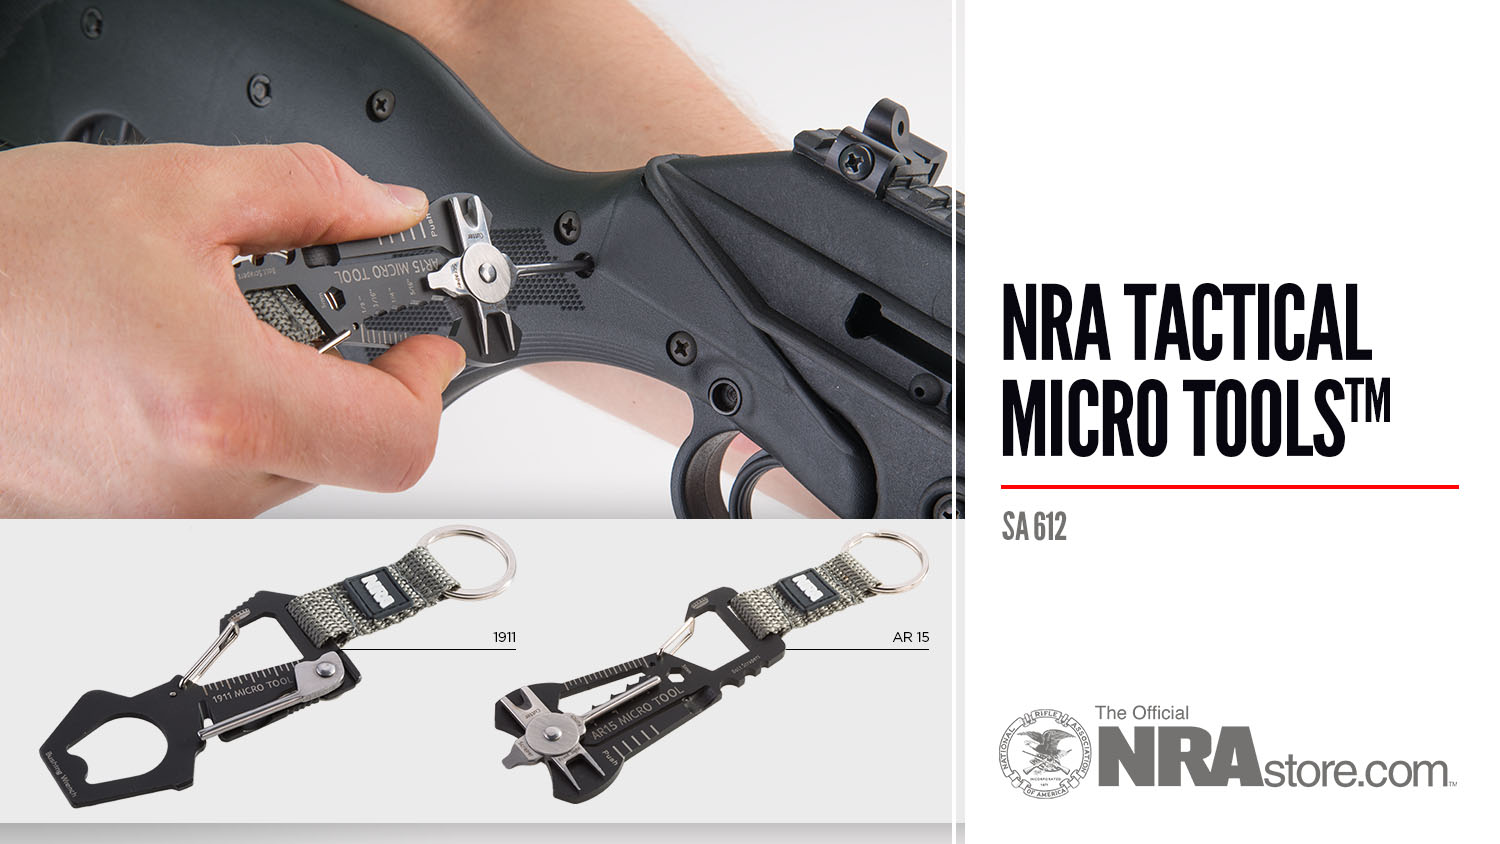 NRAstore Product Highlight: Tactical Micro Tools